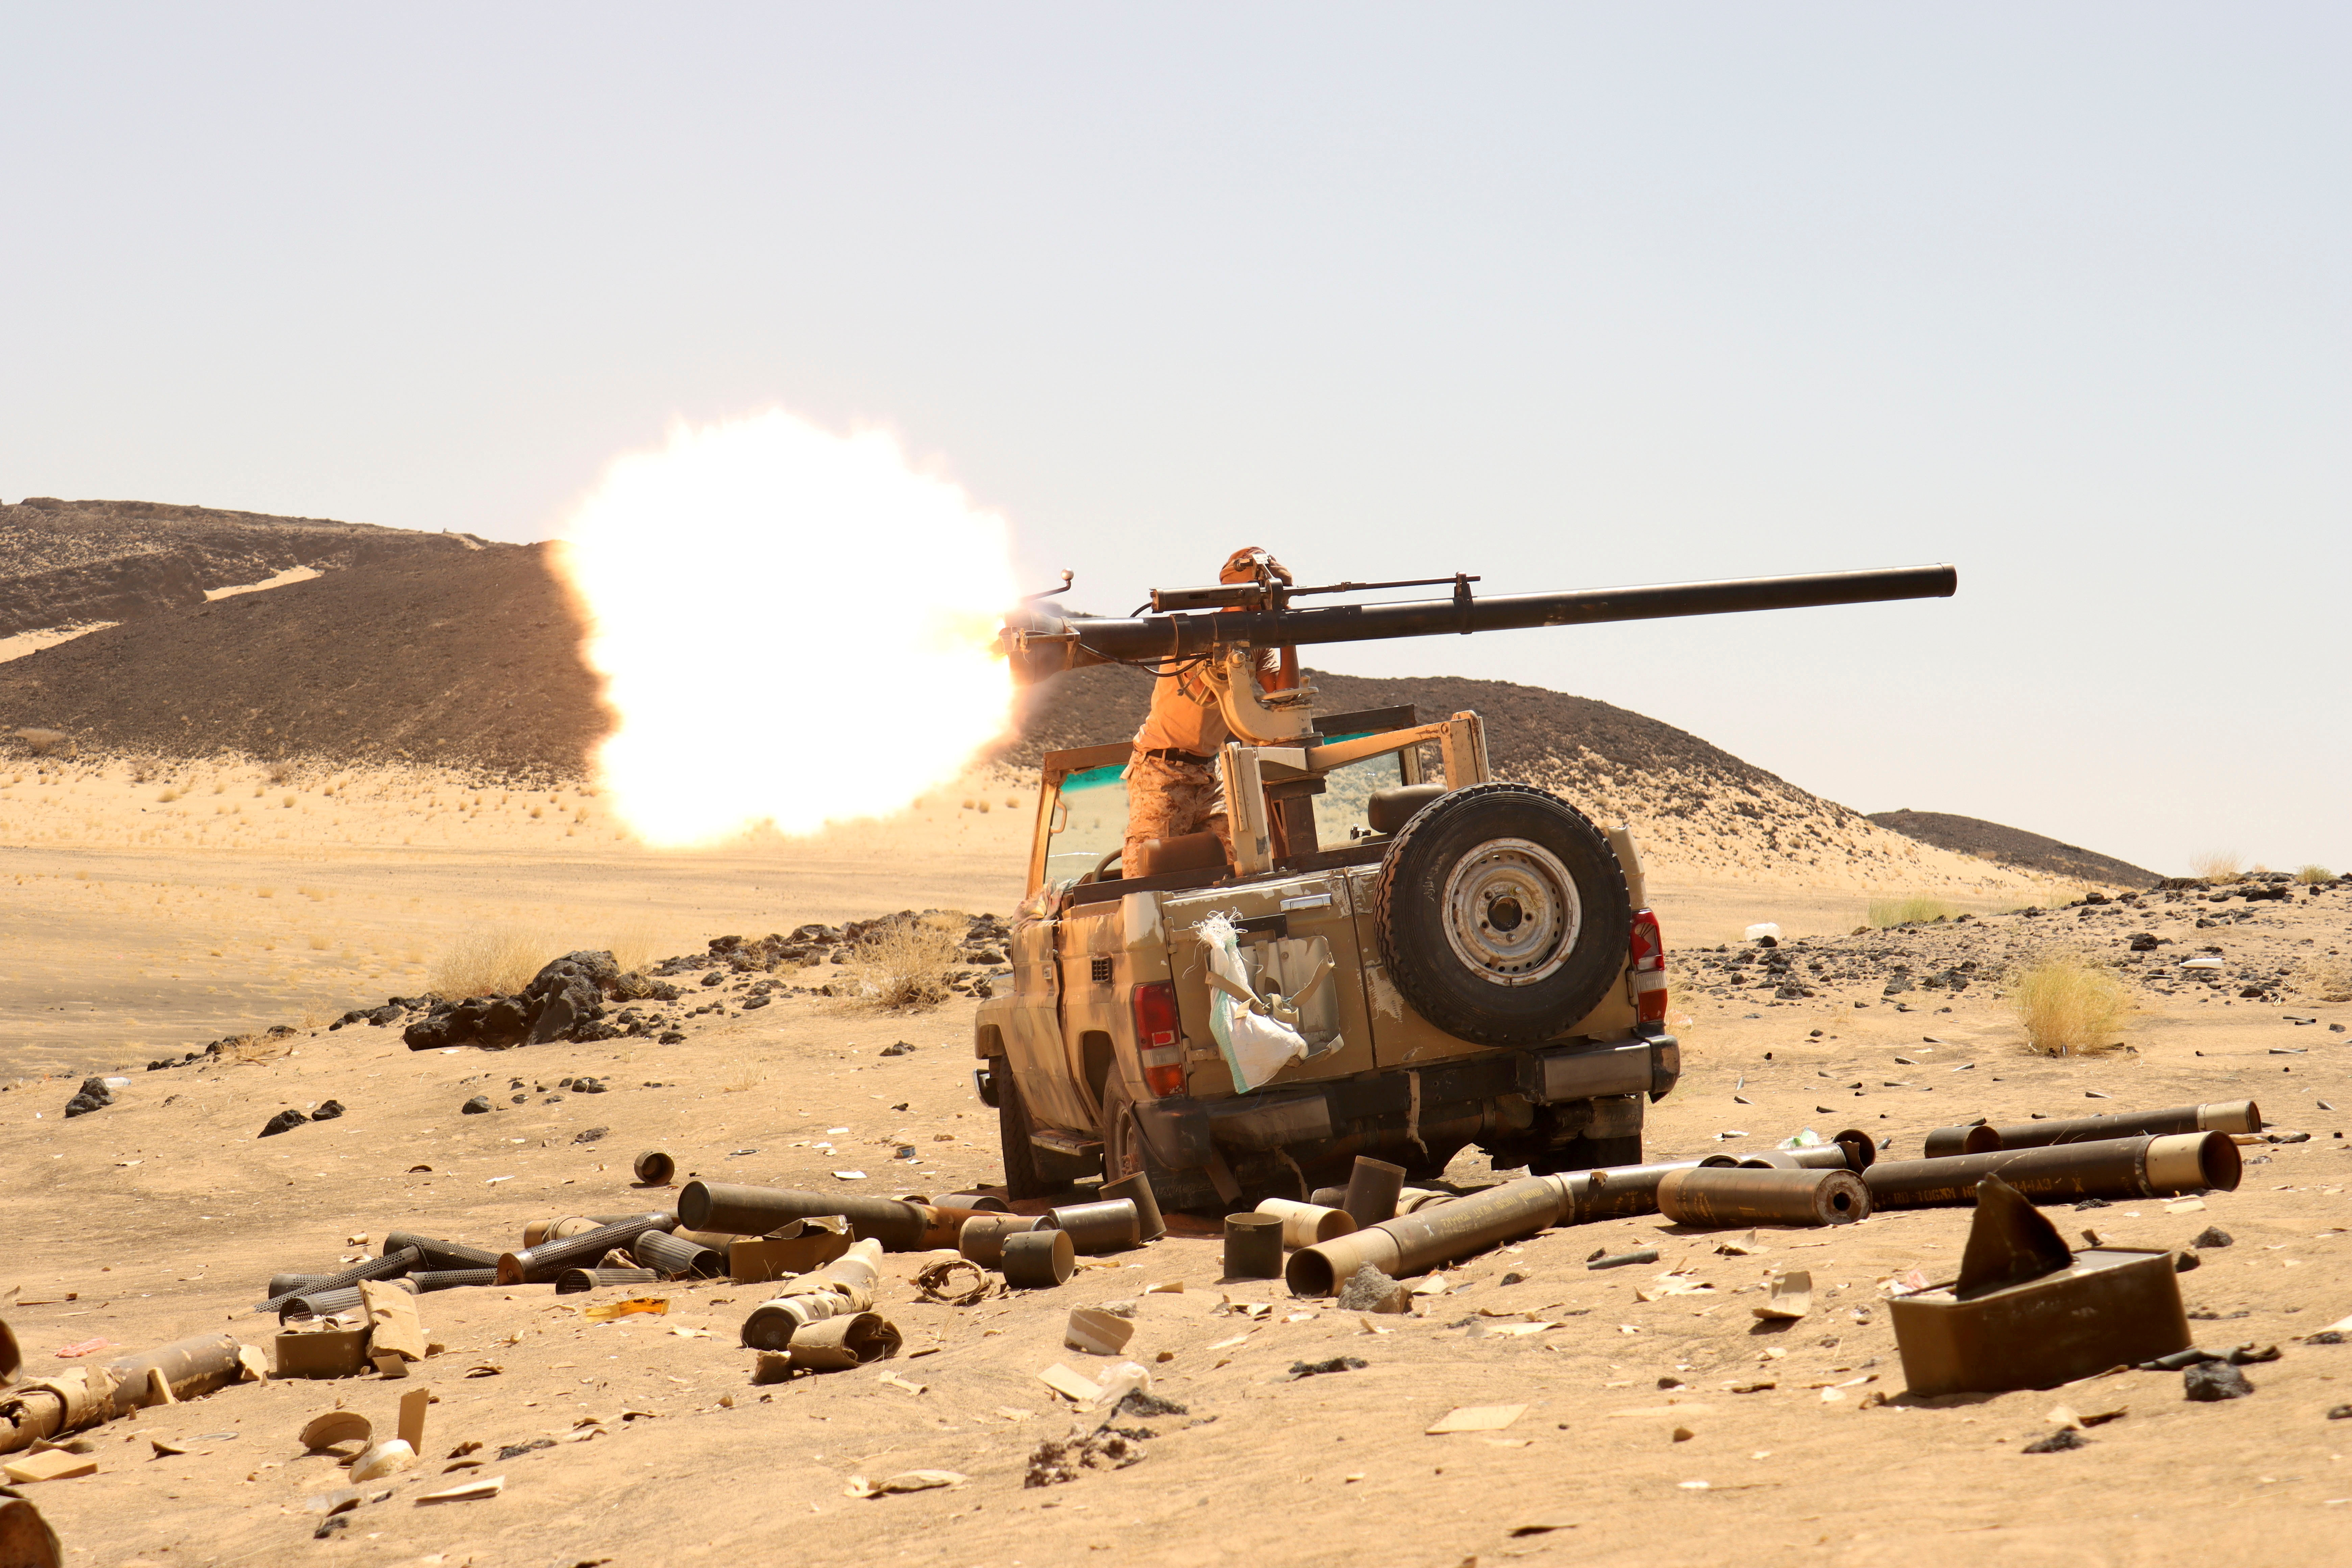 A Yemeni government fighter fires a vehicle-mounted weapon at a frontline position during fighting against Houthi fighters in Marib, Yemen March 9, 2021. Picture taken March 9, 2021. REUTERS/Ali Owidha/File Photo